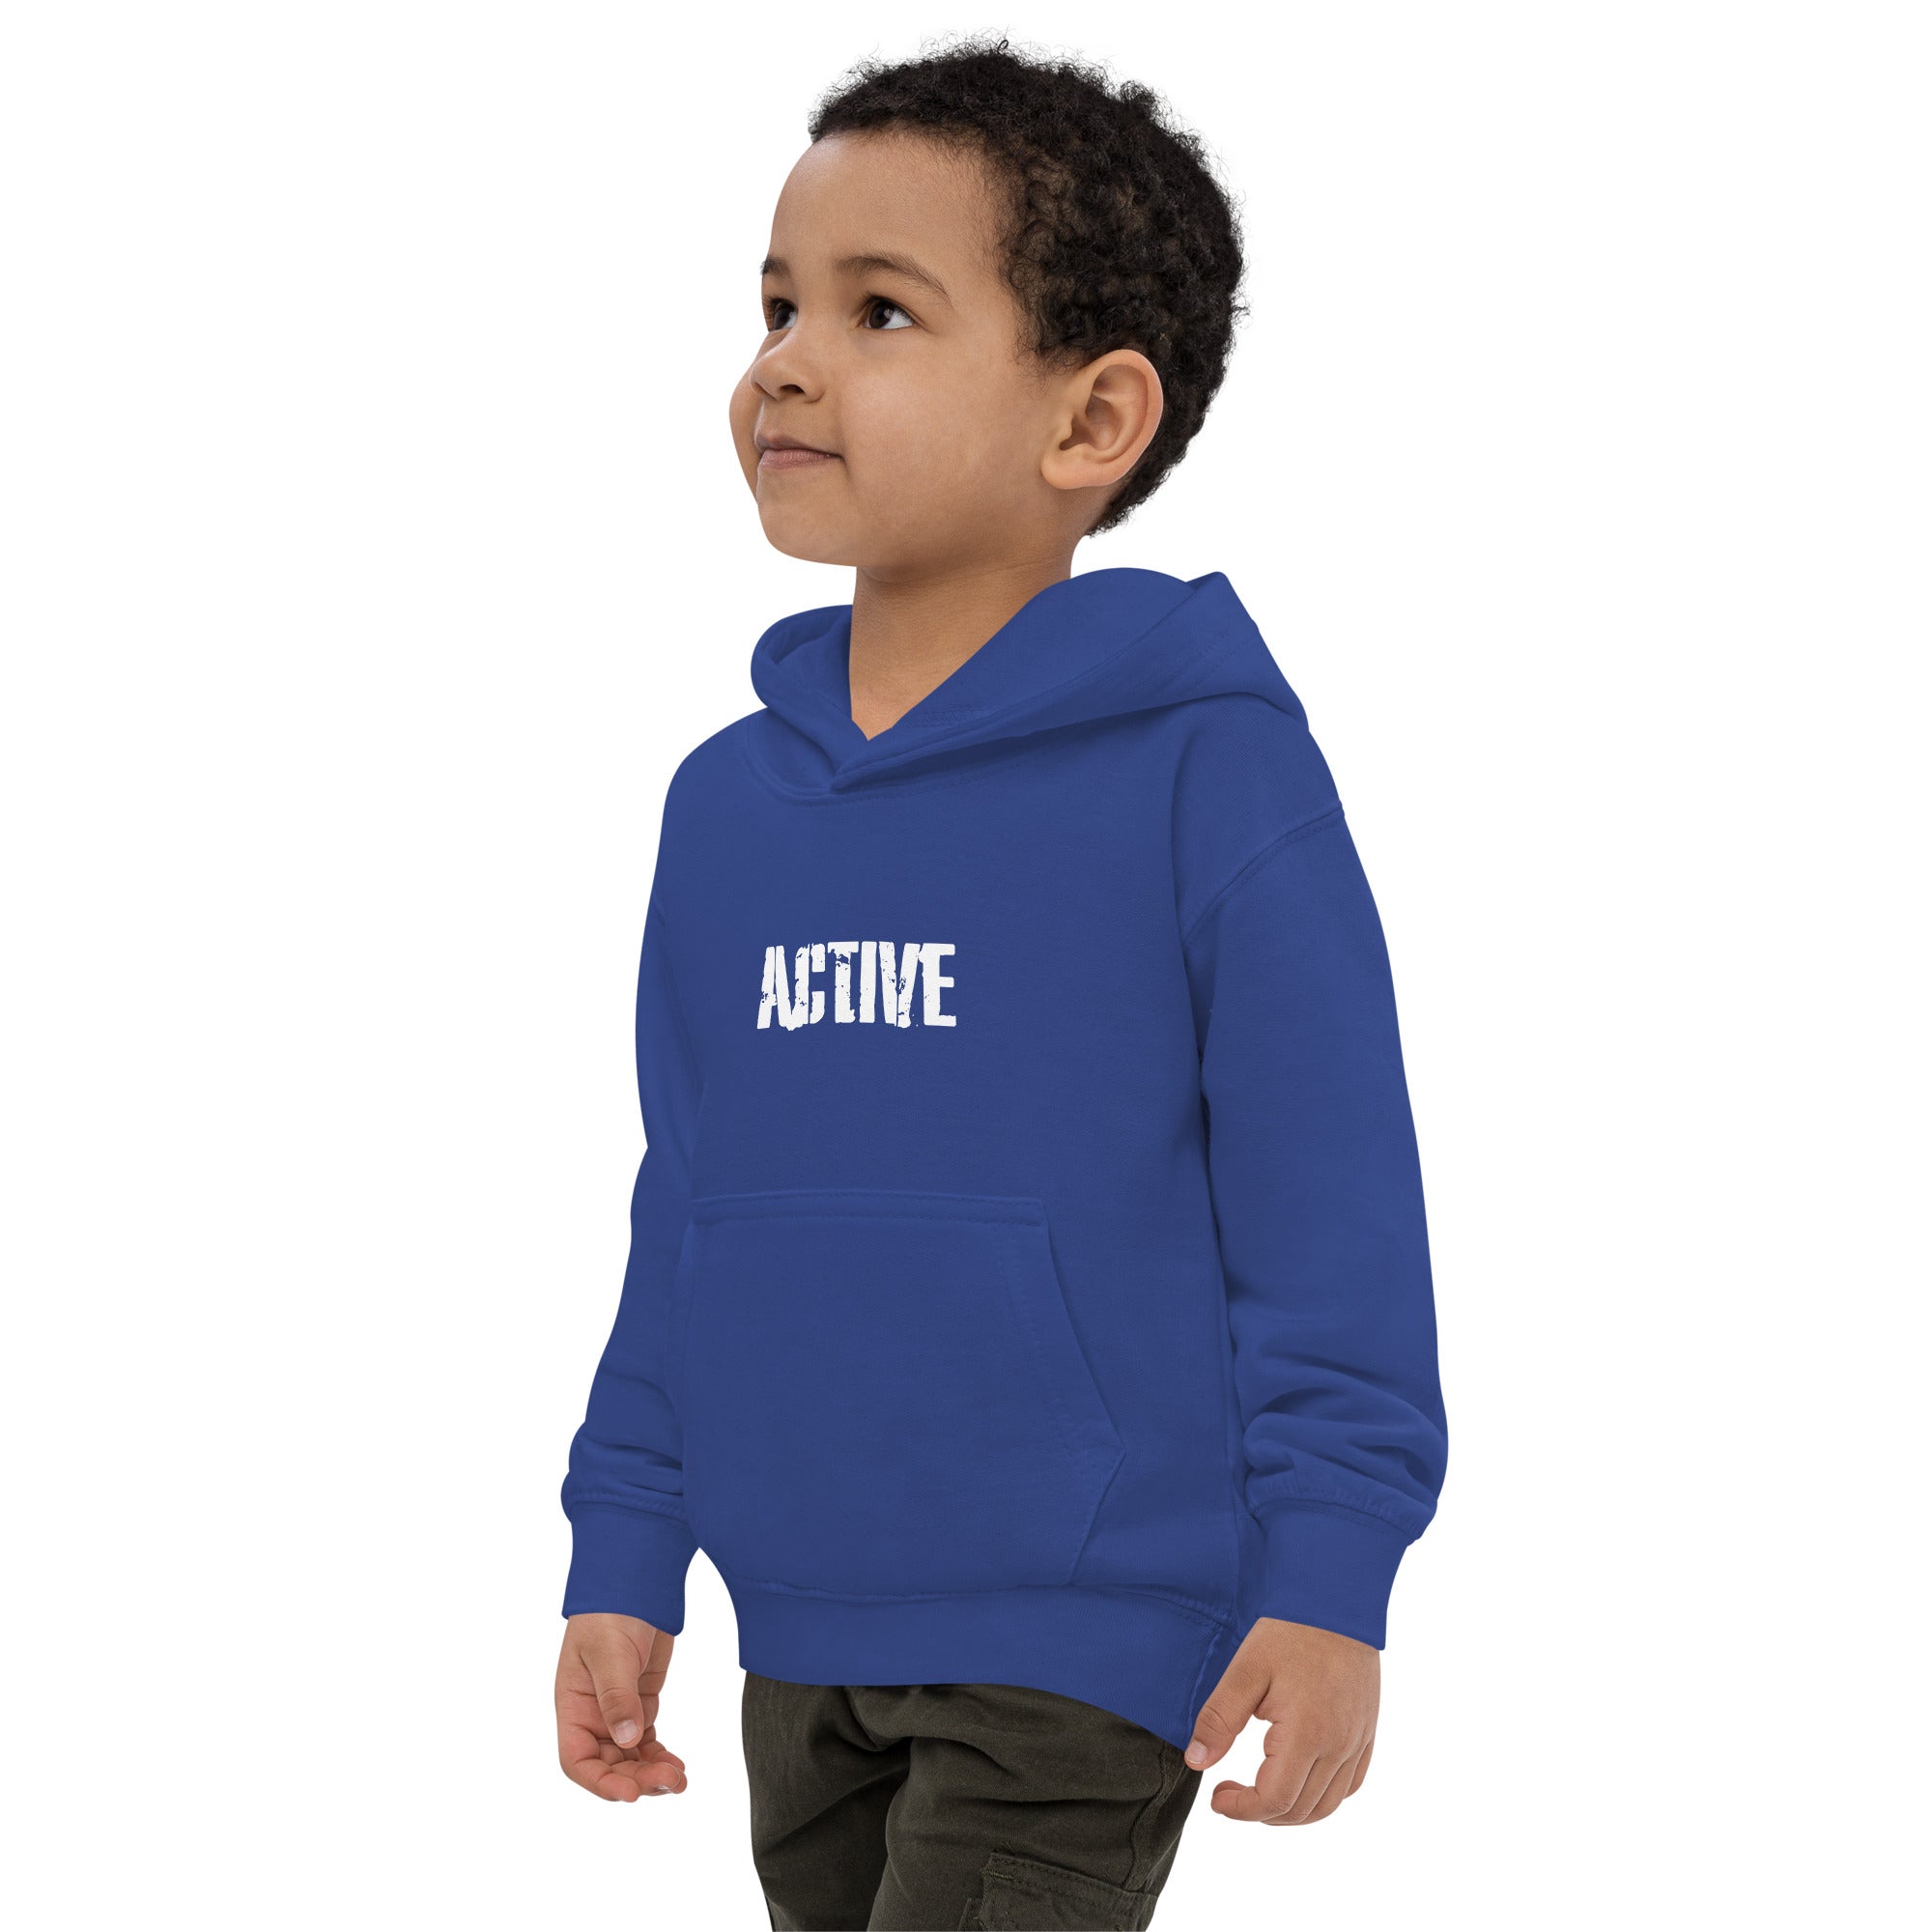 Youth Active Hoodie